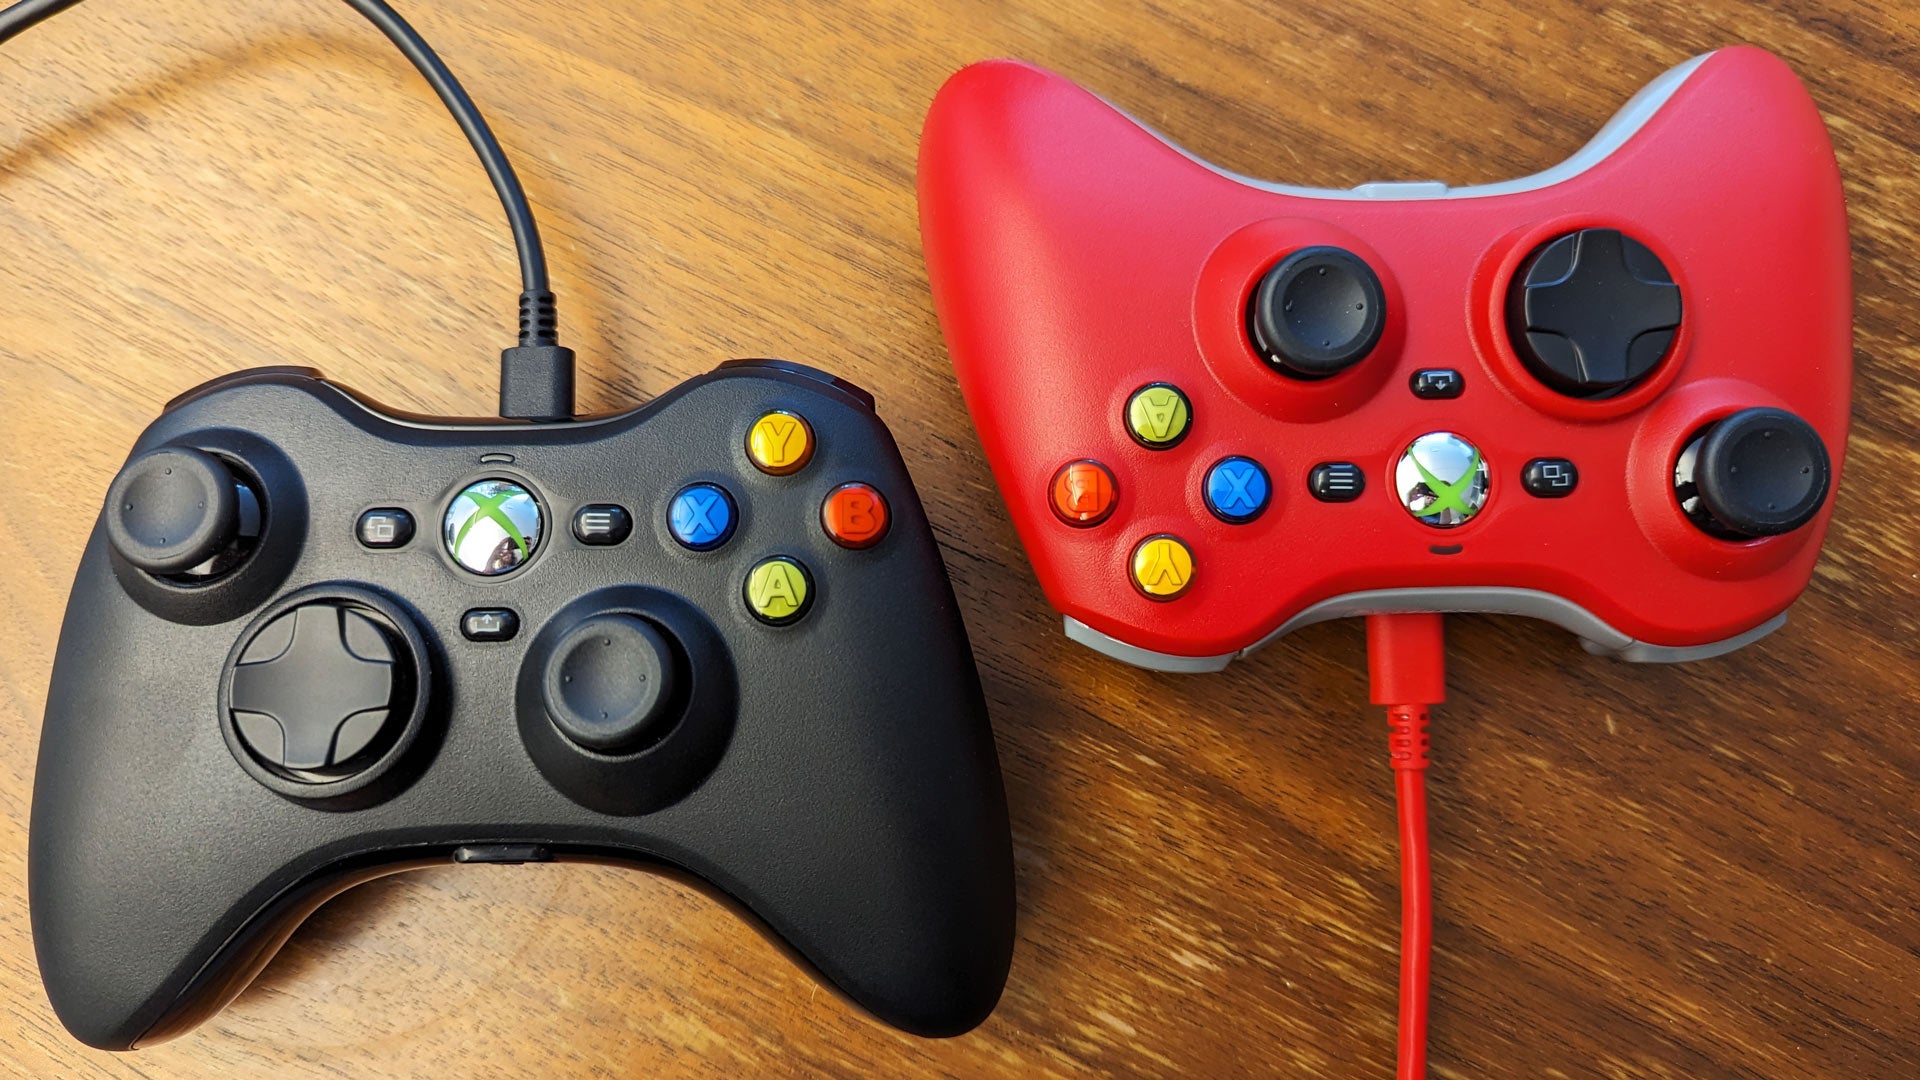 Replica Xbox 360 Controller Nails The Vibes, Lacks The Wireless